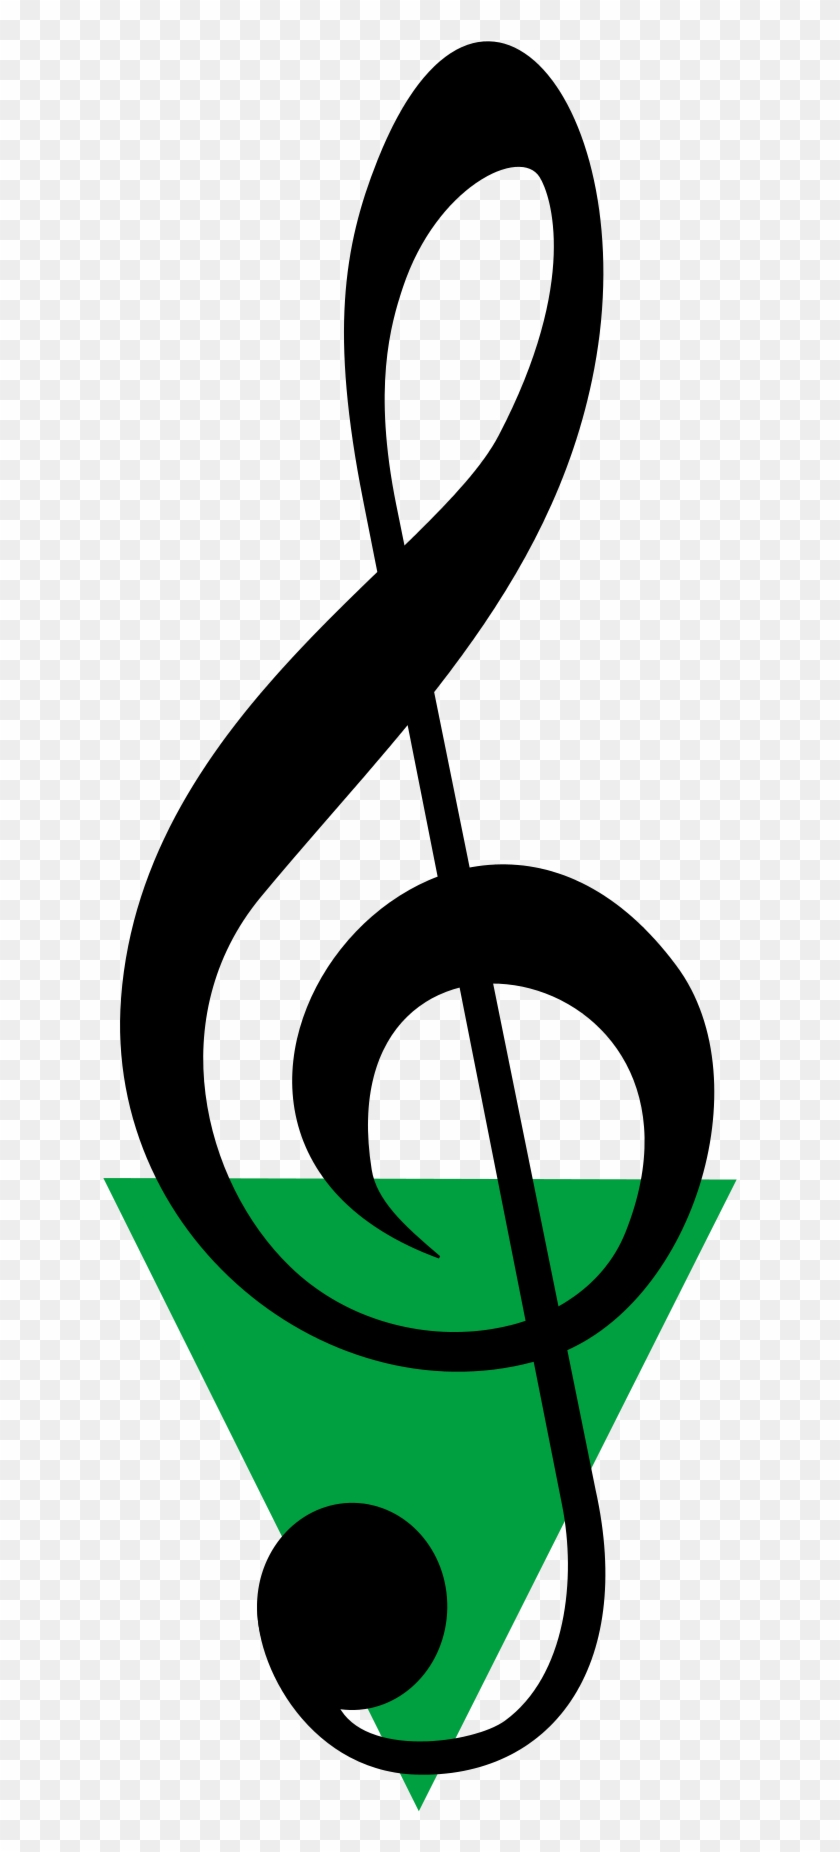 Open - Symbols Of Musical Note #348505